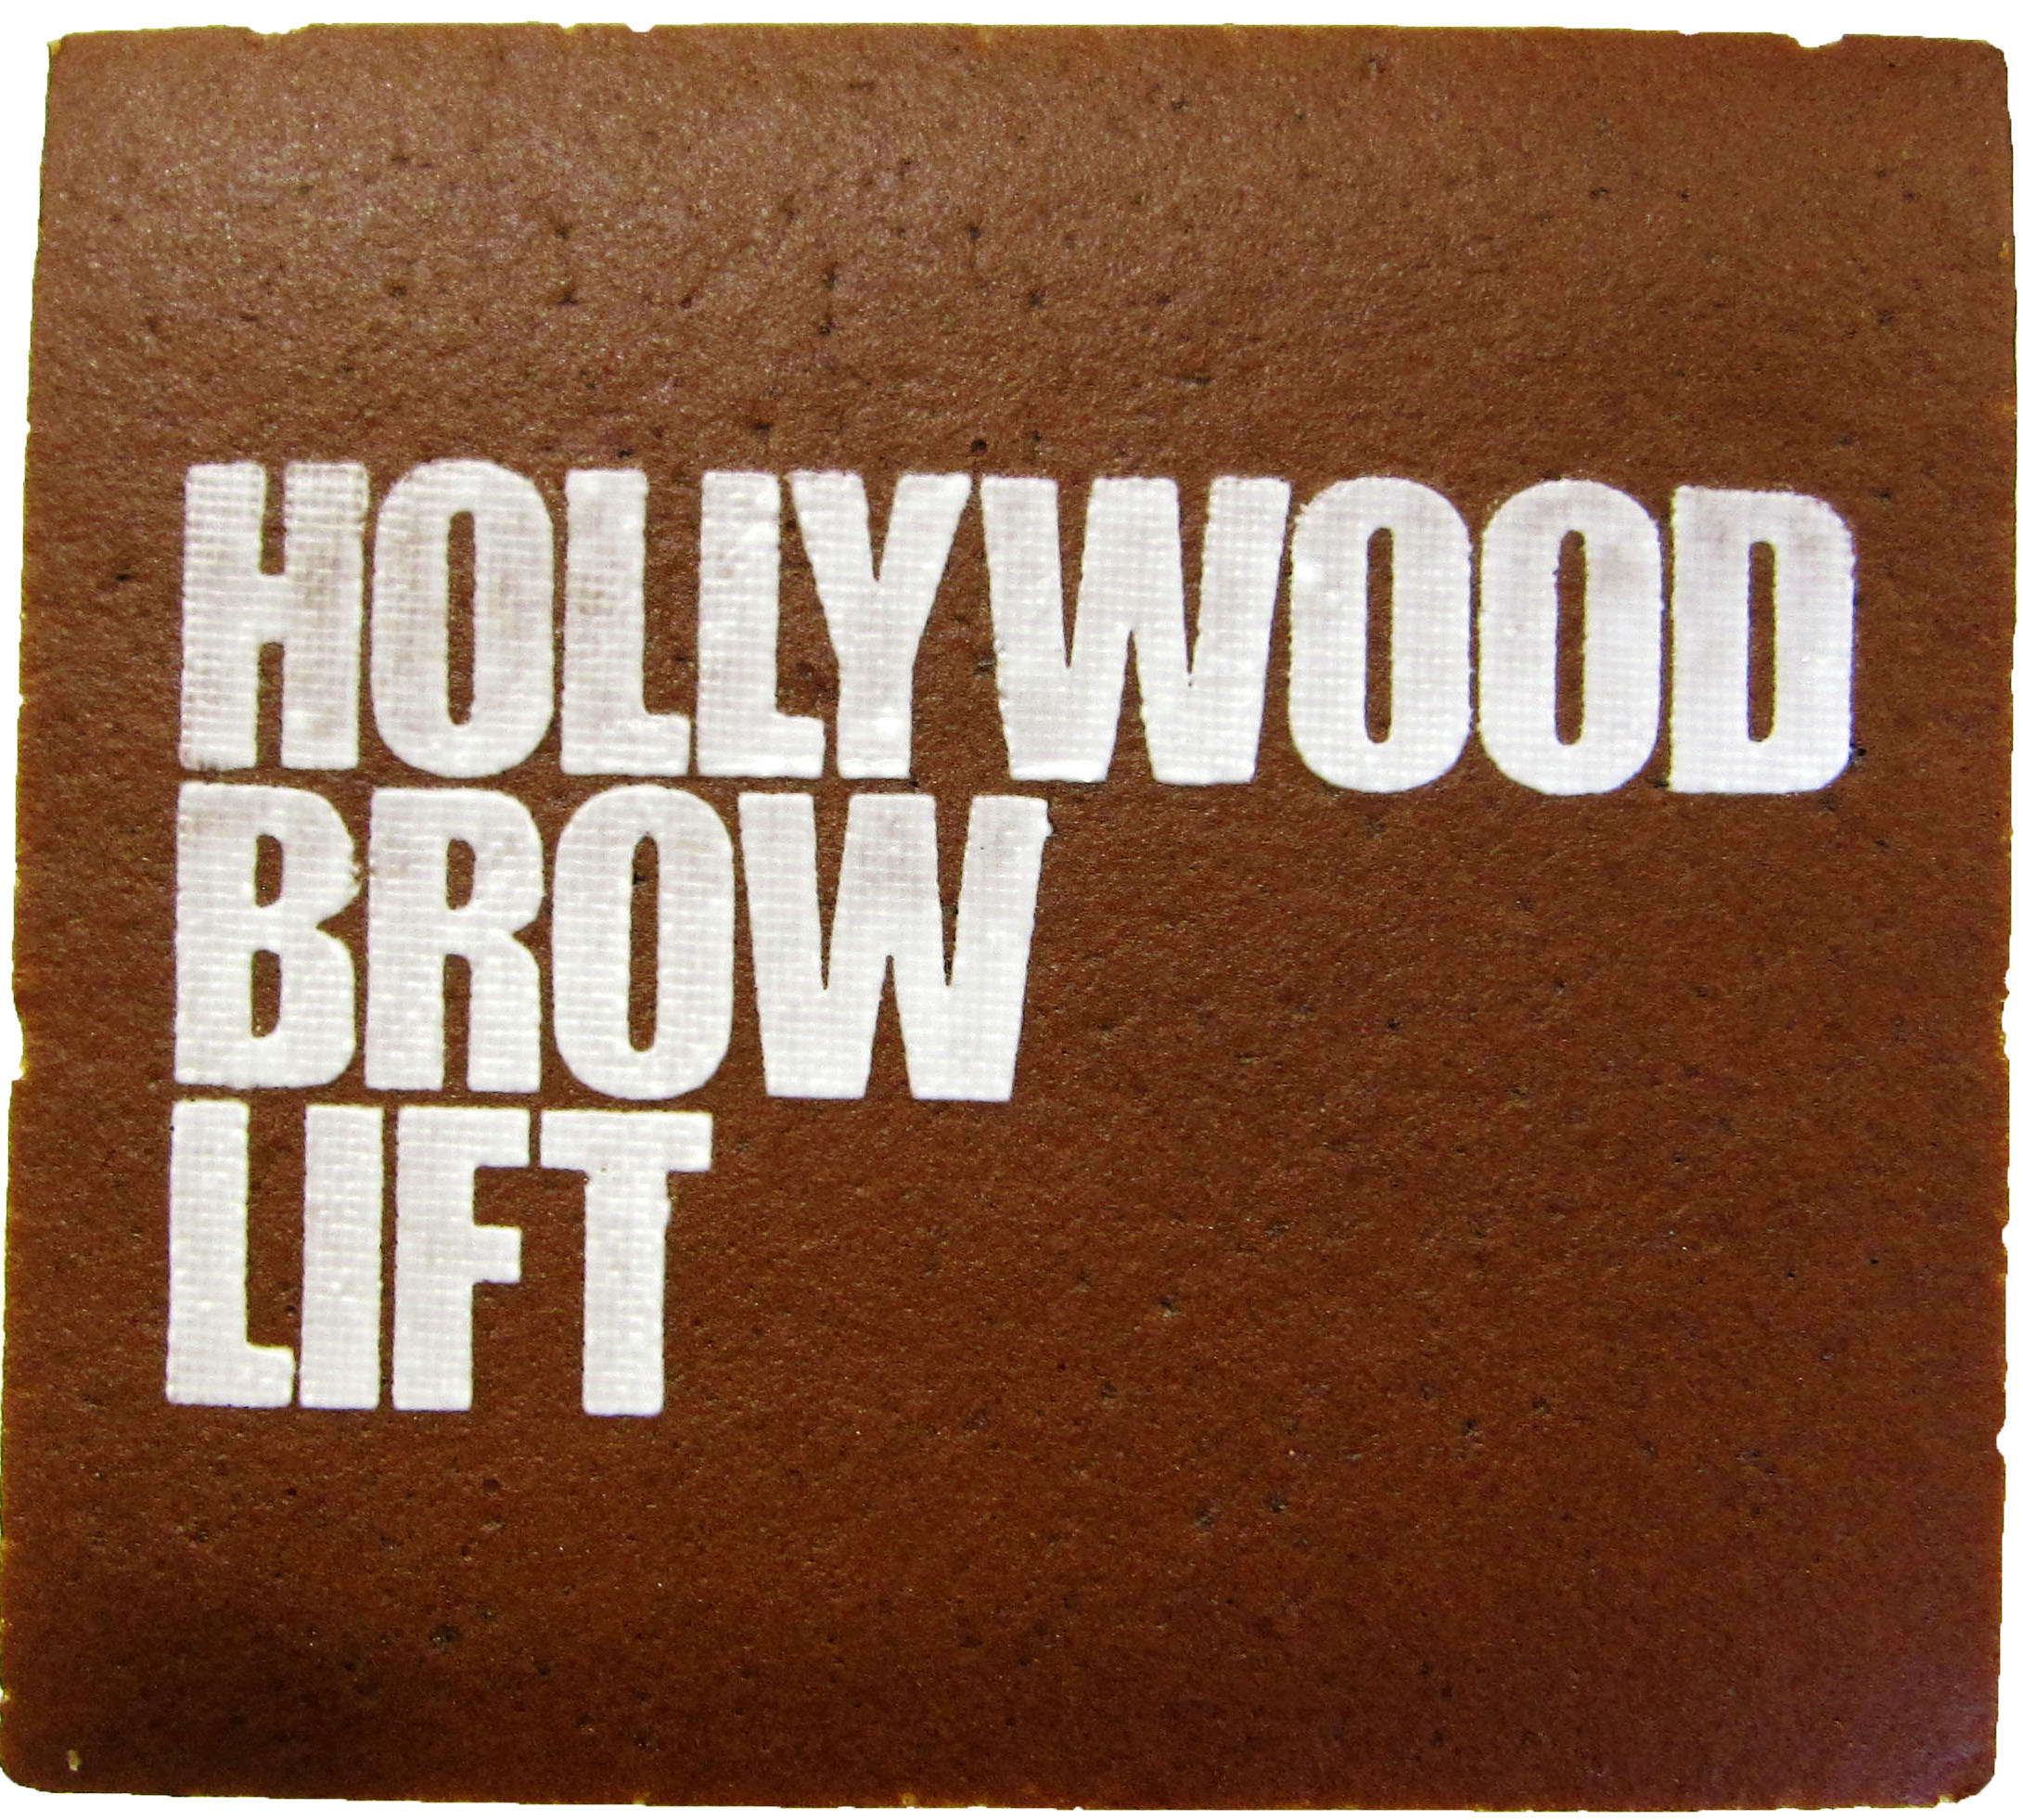 HOLLYWOOD BROWN LIFT